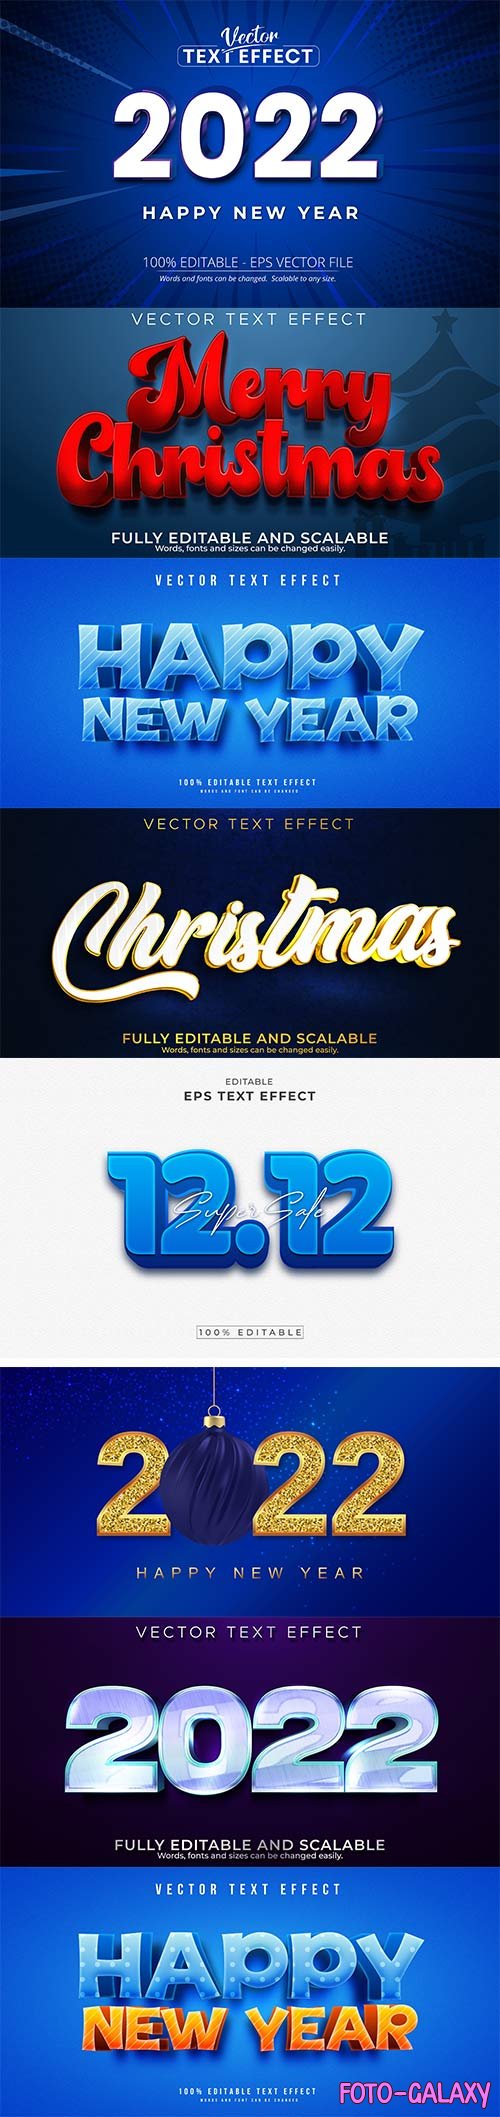 2022 New year and christmas editable text effect vector vol 33